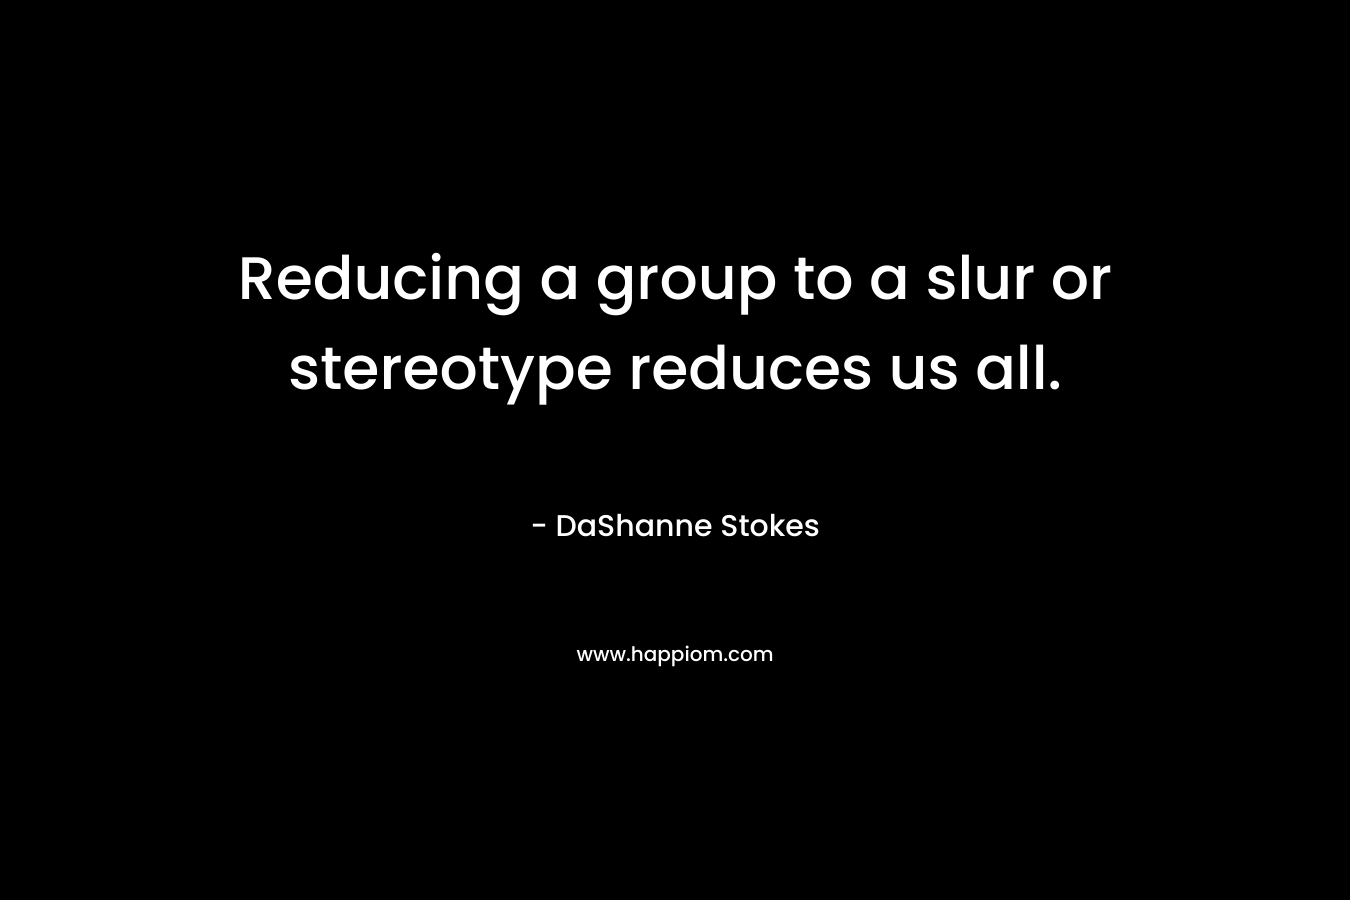 Reducing a group to a slur or stereotype reduces us all. – DaShanne Stokes